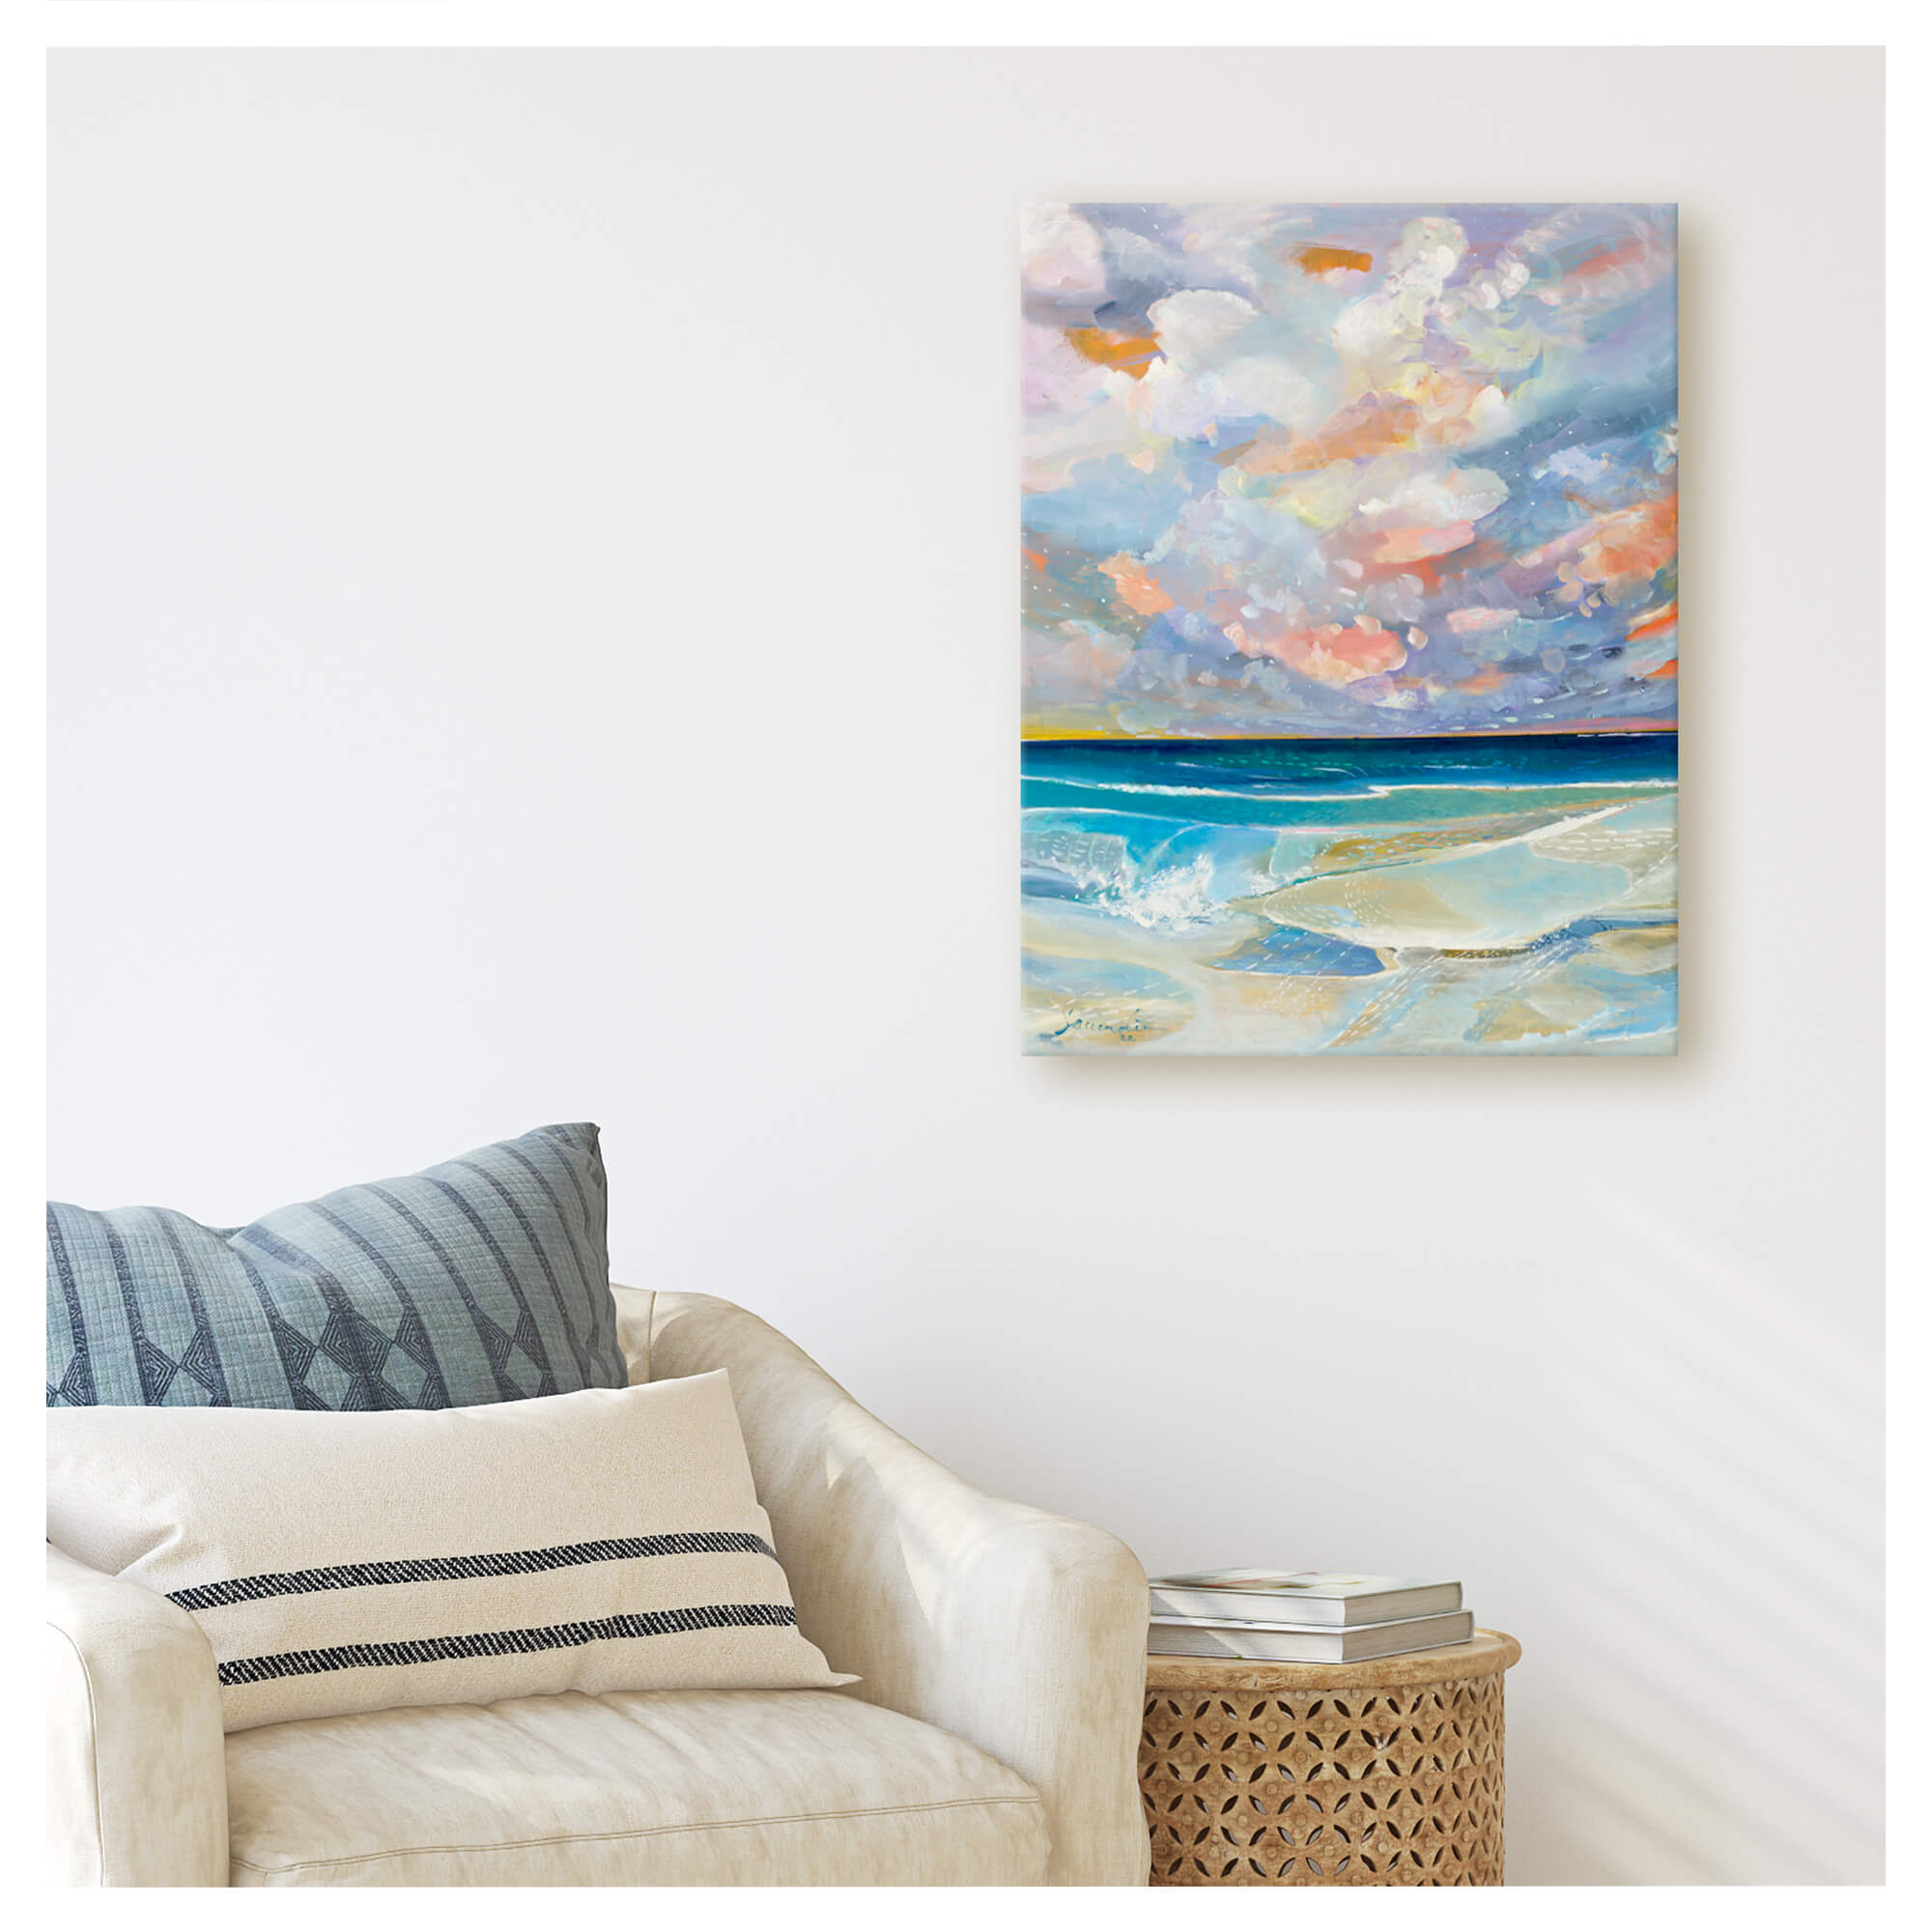 A canvas giclée art print featuring abstract teal and blue tinted waves crashing towards the shore by popular Hawaii artist Saumolia Puapuaga